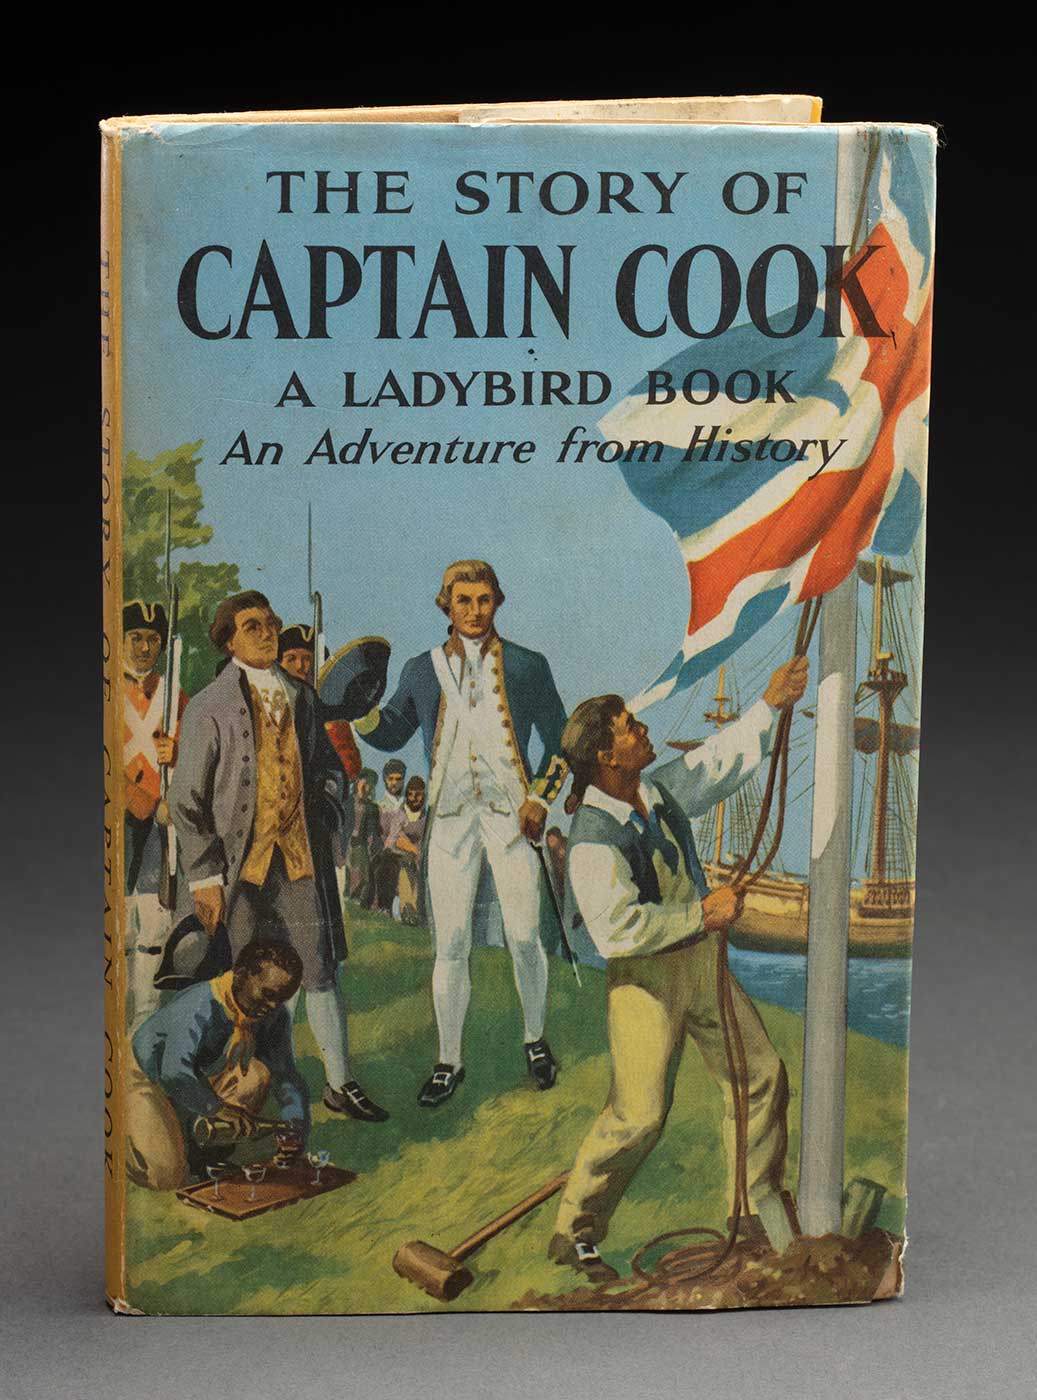 A book with a colourful cover featuring a man raising a Union Jack flag and with captian cook depicted beside him. Text of the cover reads 'THE STORY OF CAPTAIN COOK / A LADY BIRD BOOK / ...' - click to view larger image